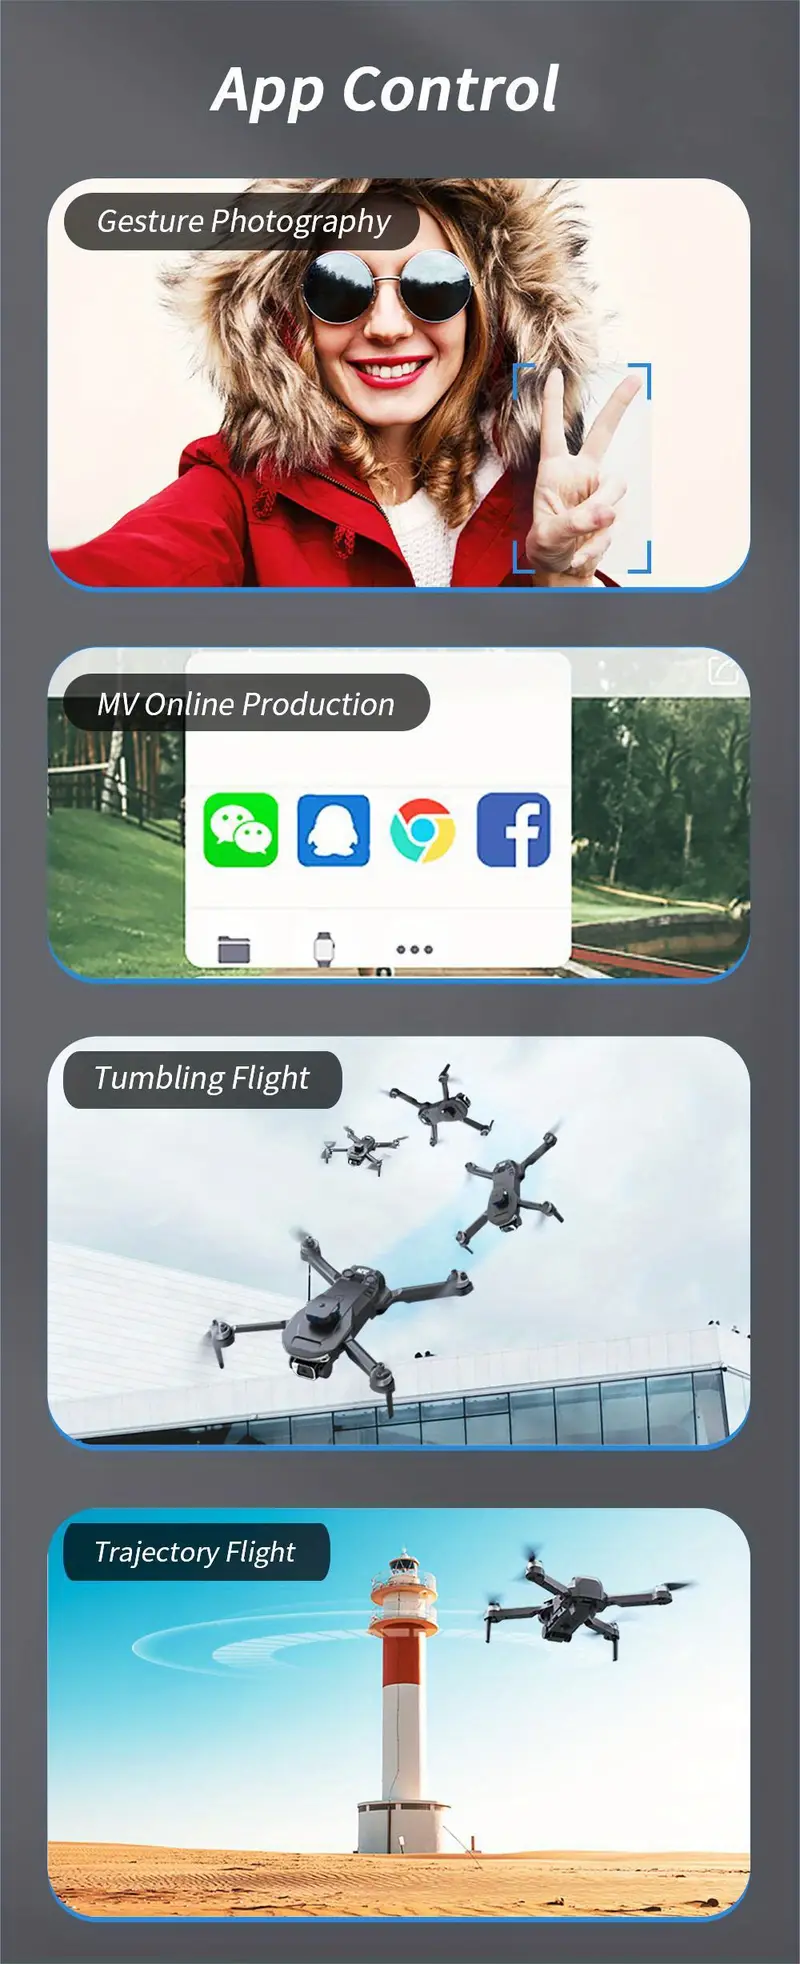 hd dual camera drone obstacle avoidance optical flow positioning headless mode one key take off landing 5g image transmission gesture photography waypoint flight includes carrying bag details 9